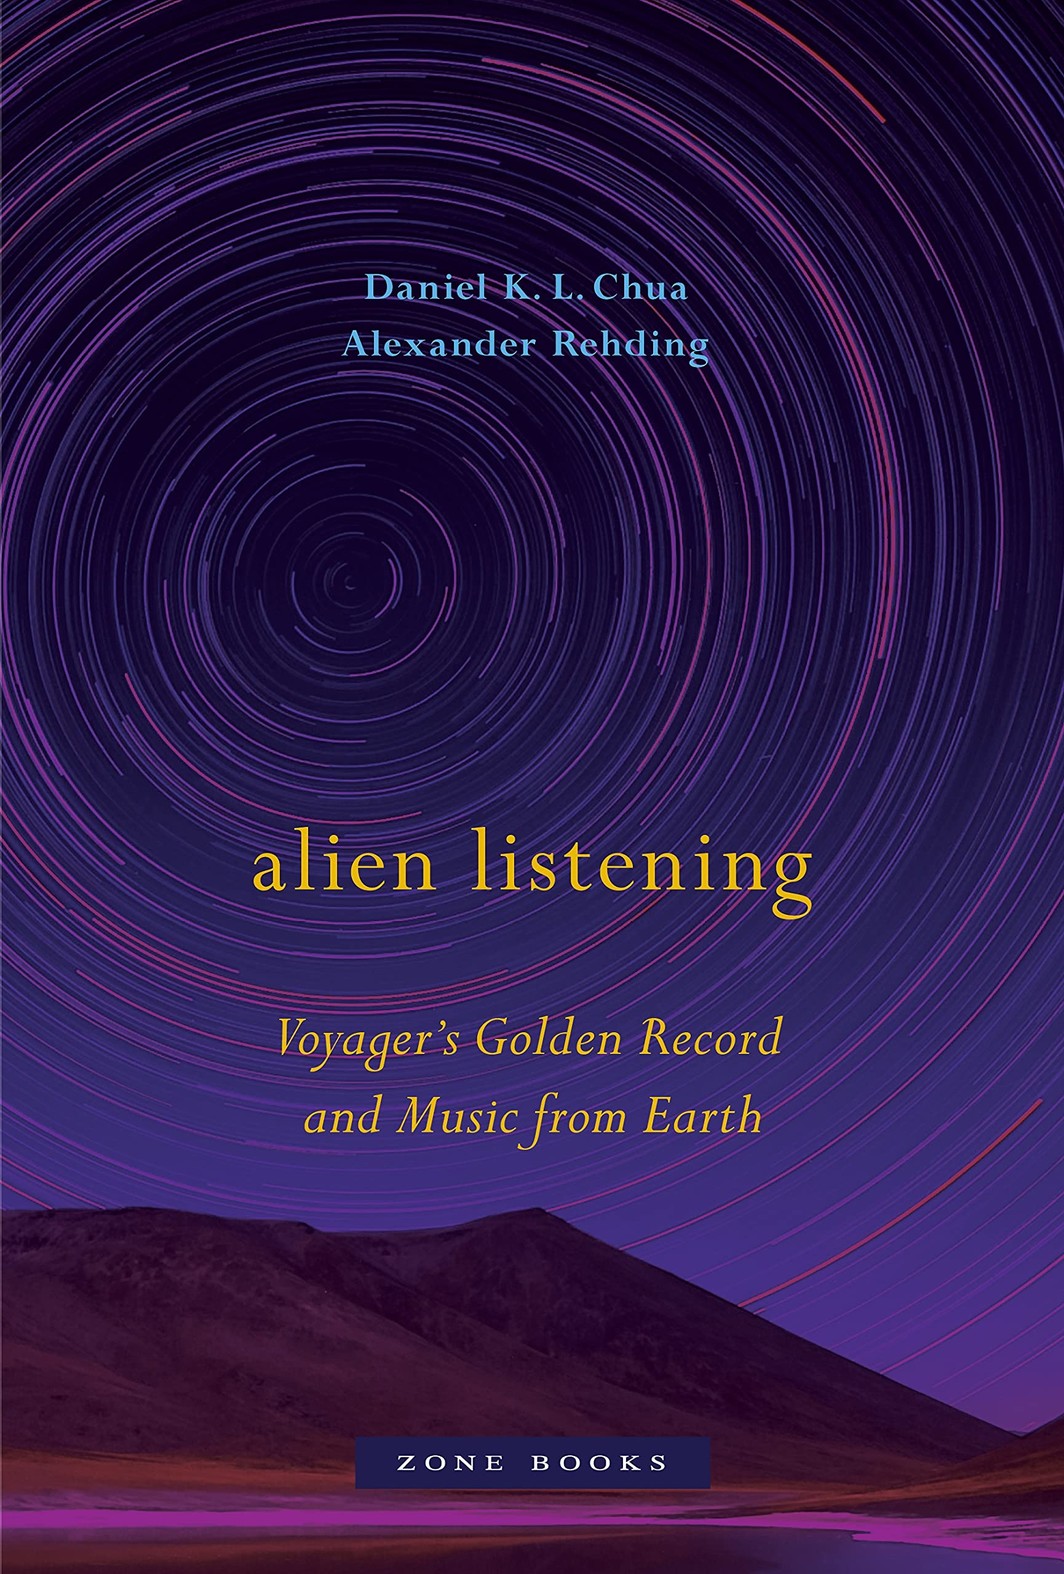 The cover of Alien Listening: Voyager's Golden Record and Music from Earth